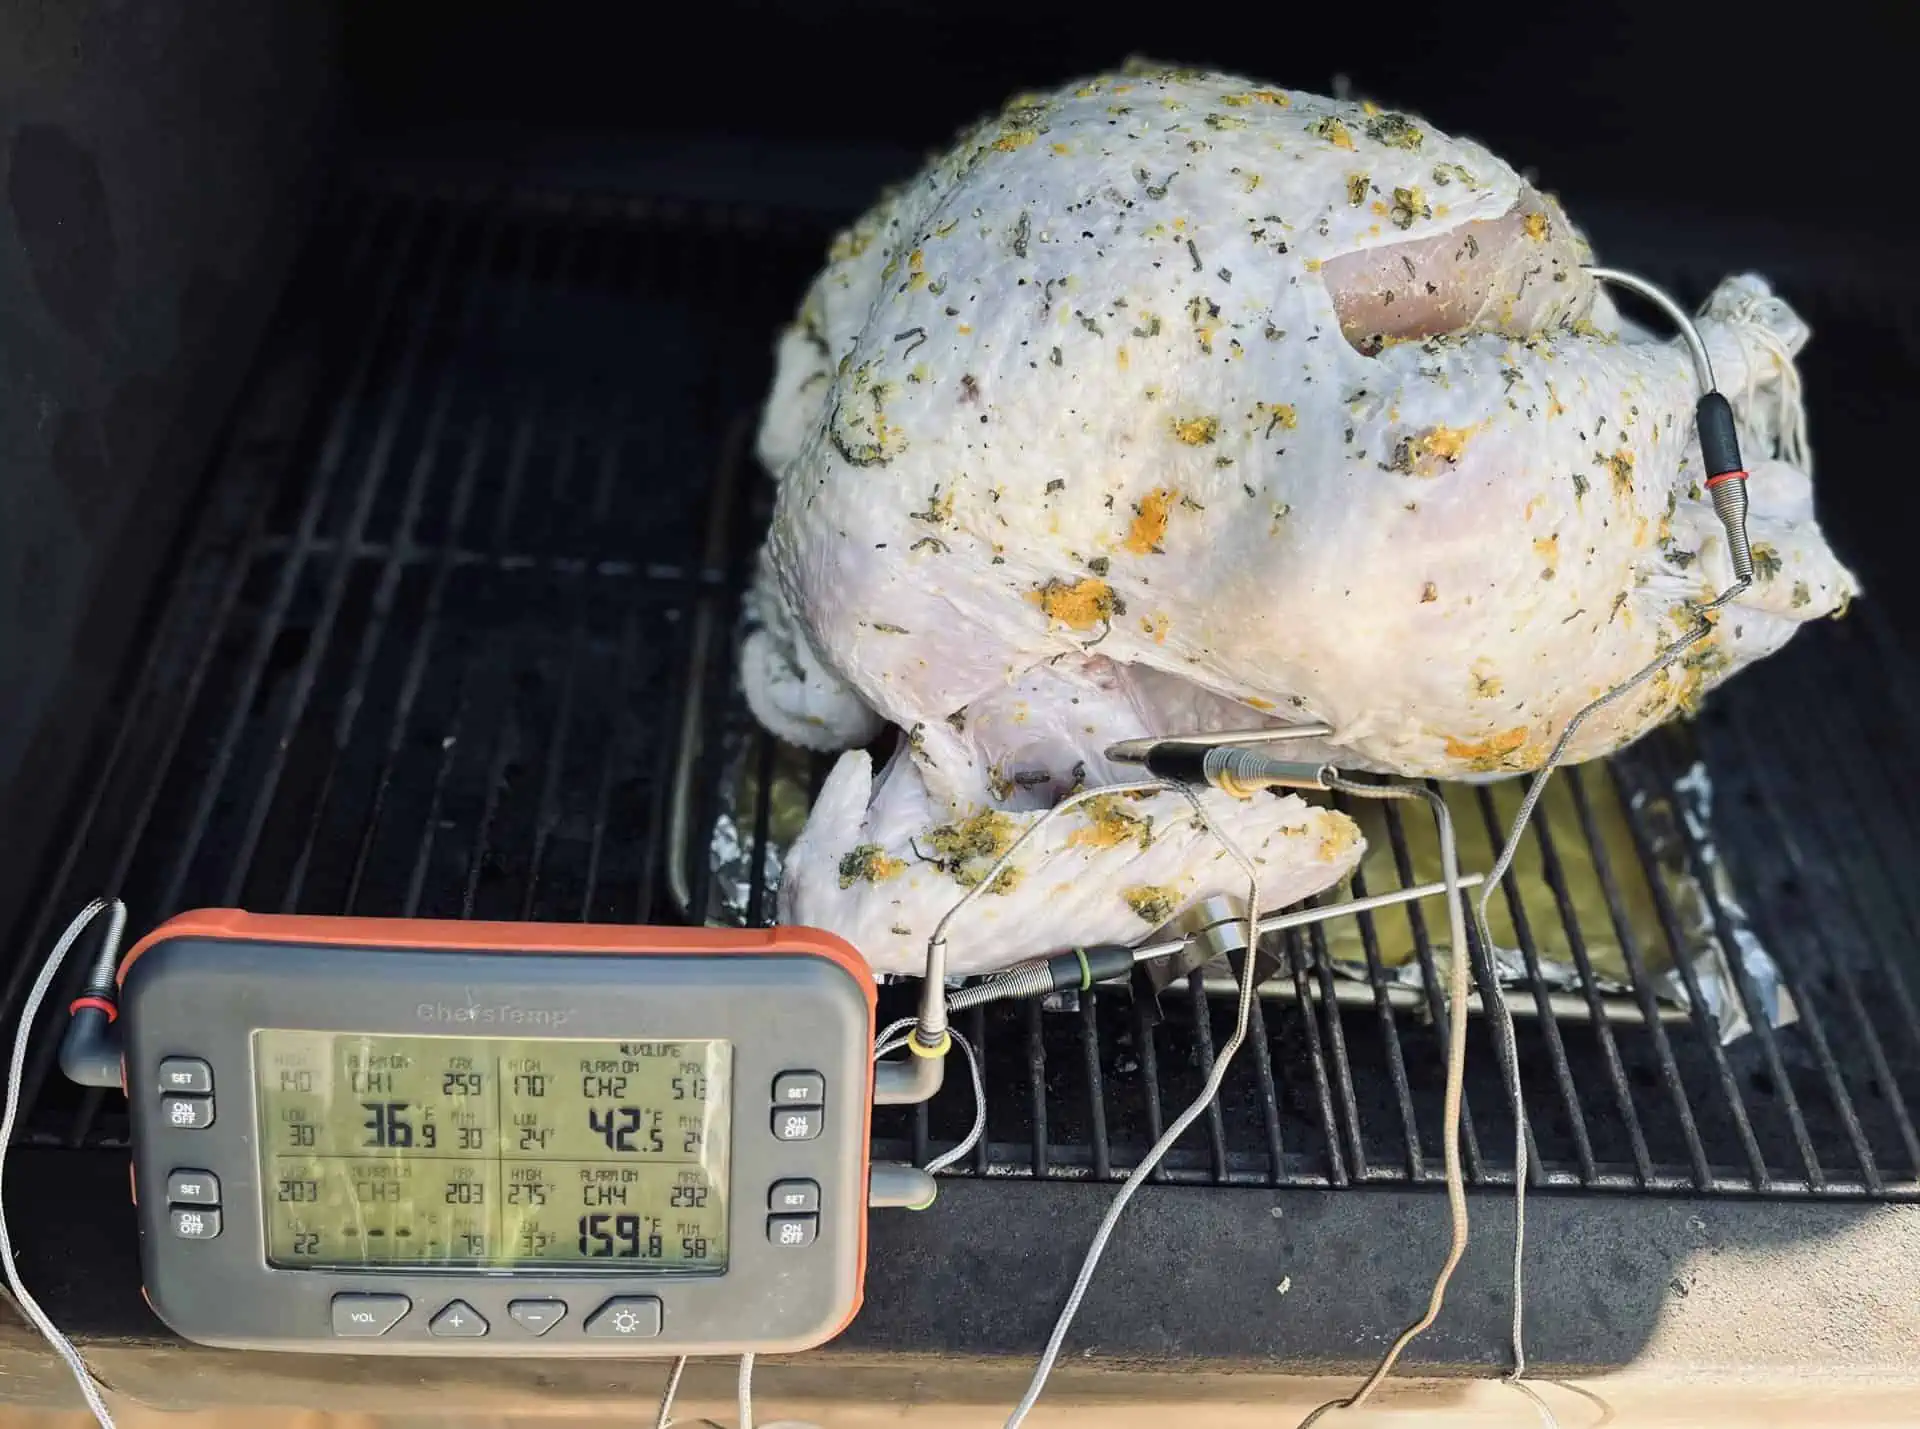 Image of a ChefsTemp Quad XPro Wireless Meat Thermometer measuring a thanksgiving turkey cooking temperature